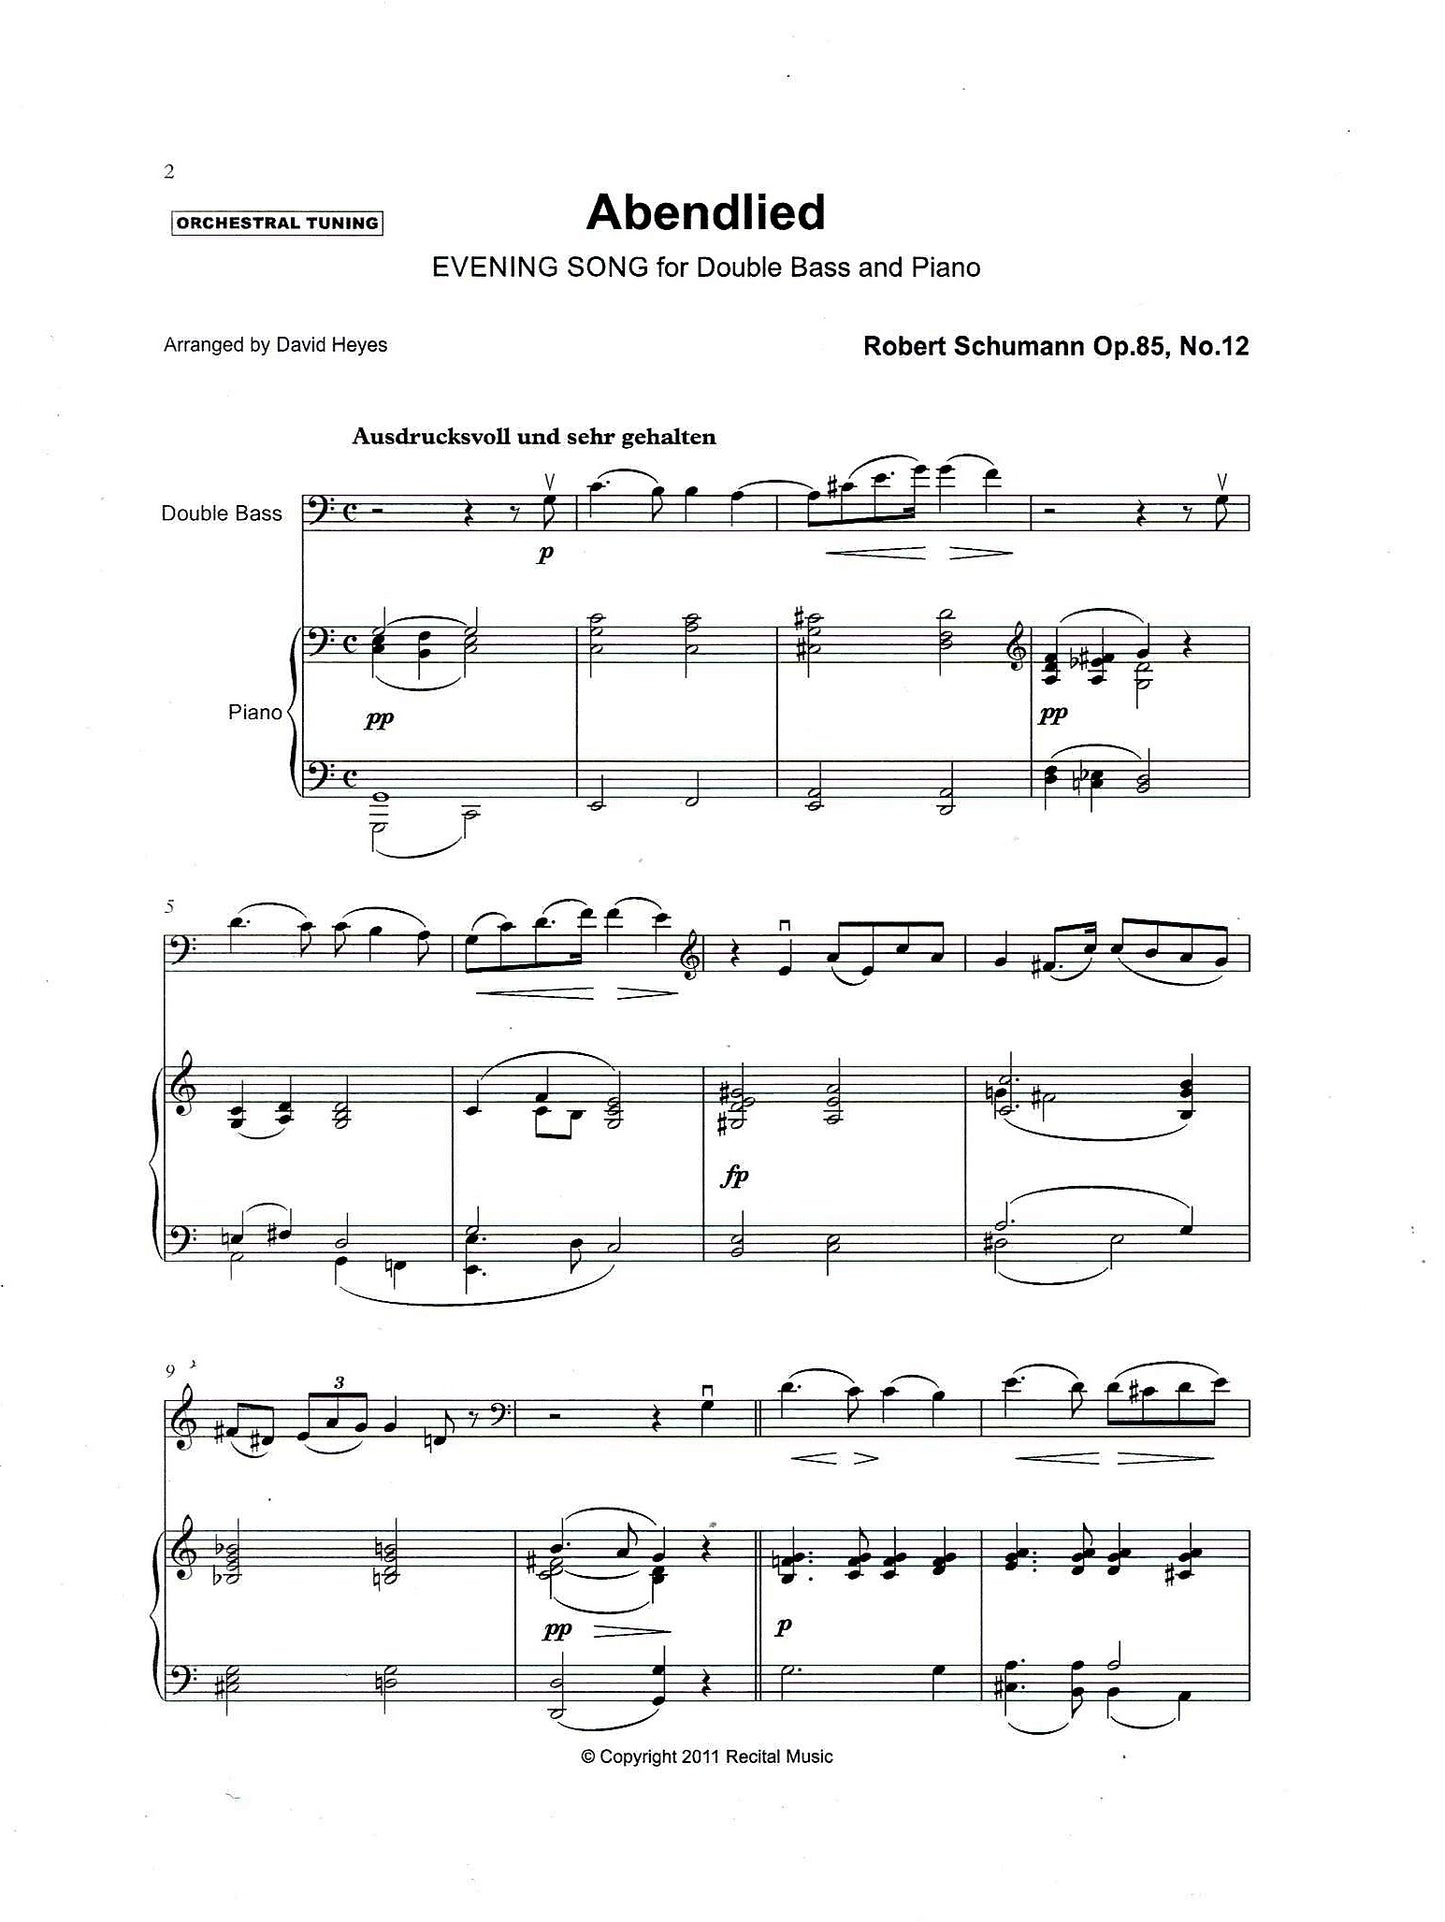 Transcriptions Book 4 (arranged by David Heyes) for double bass & piano